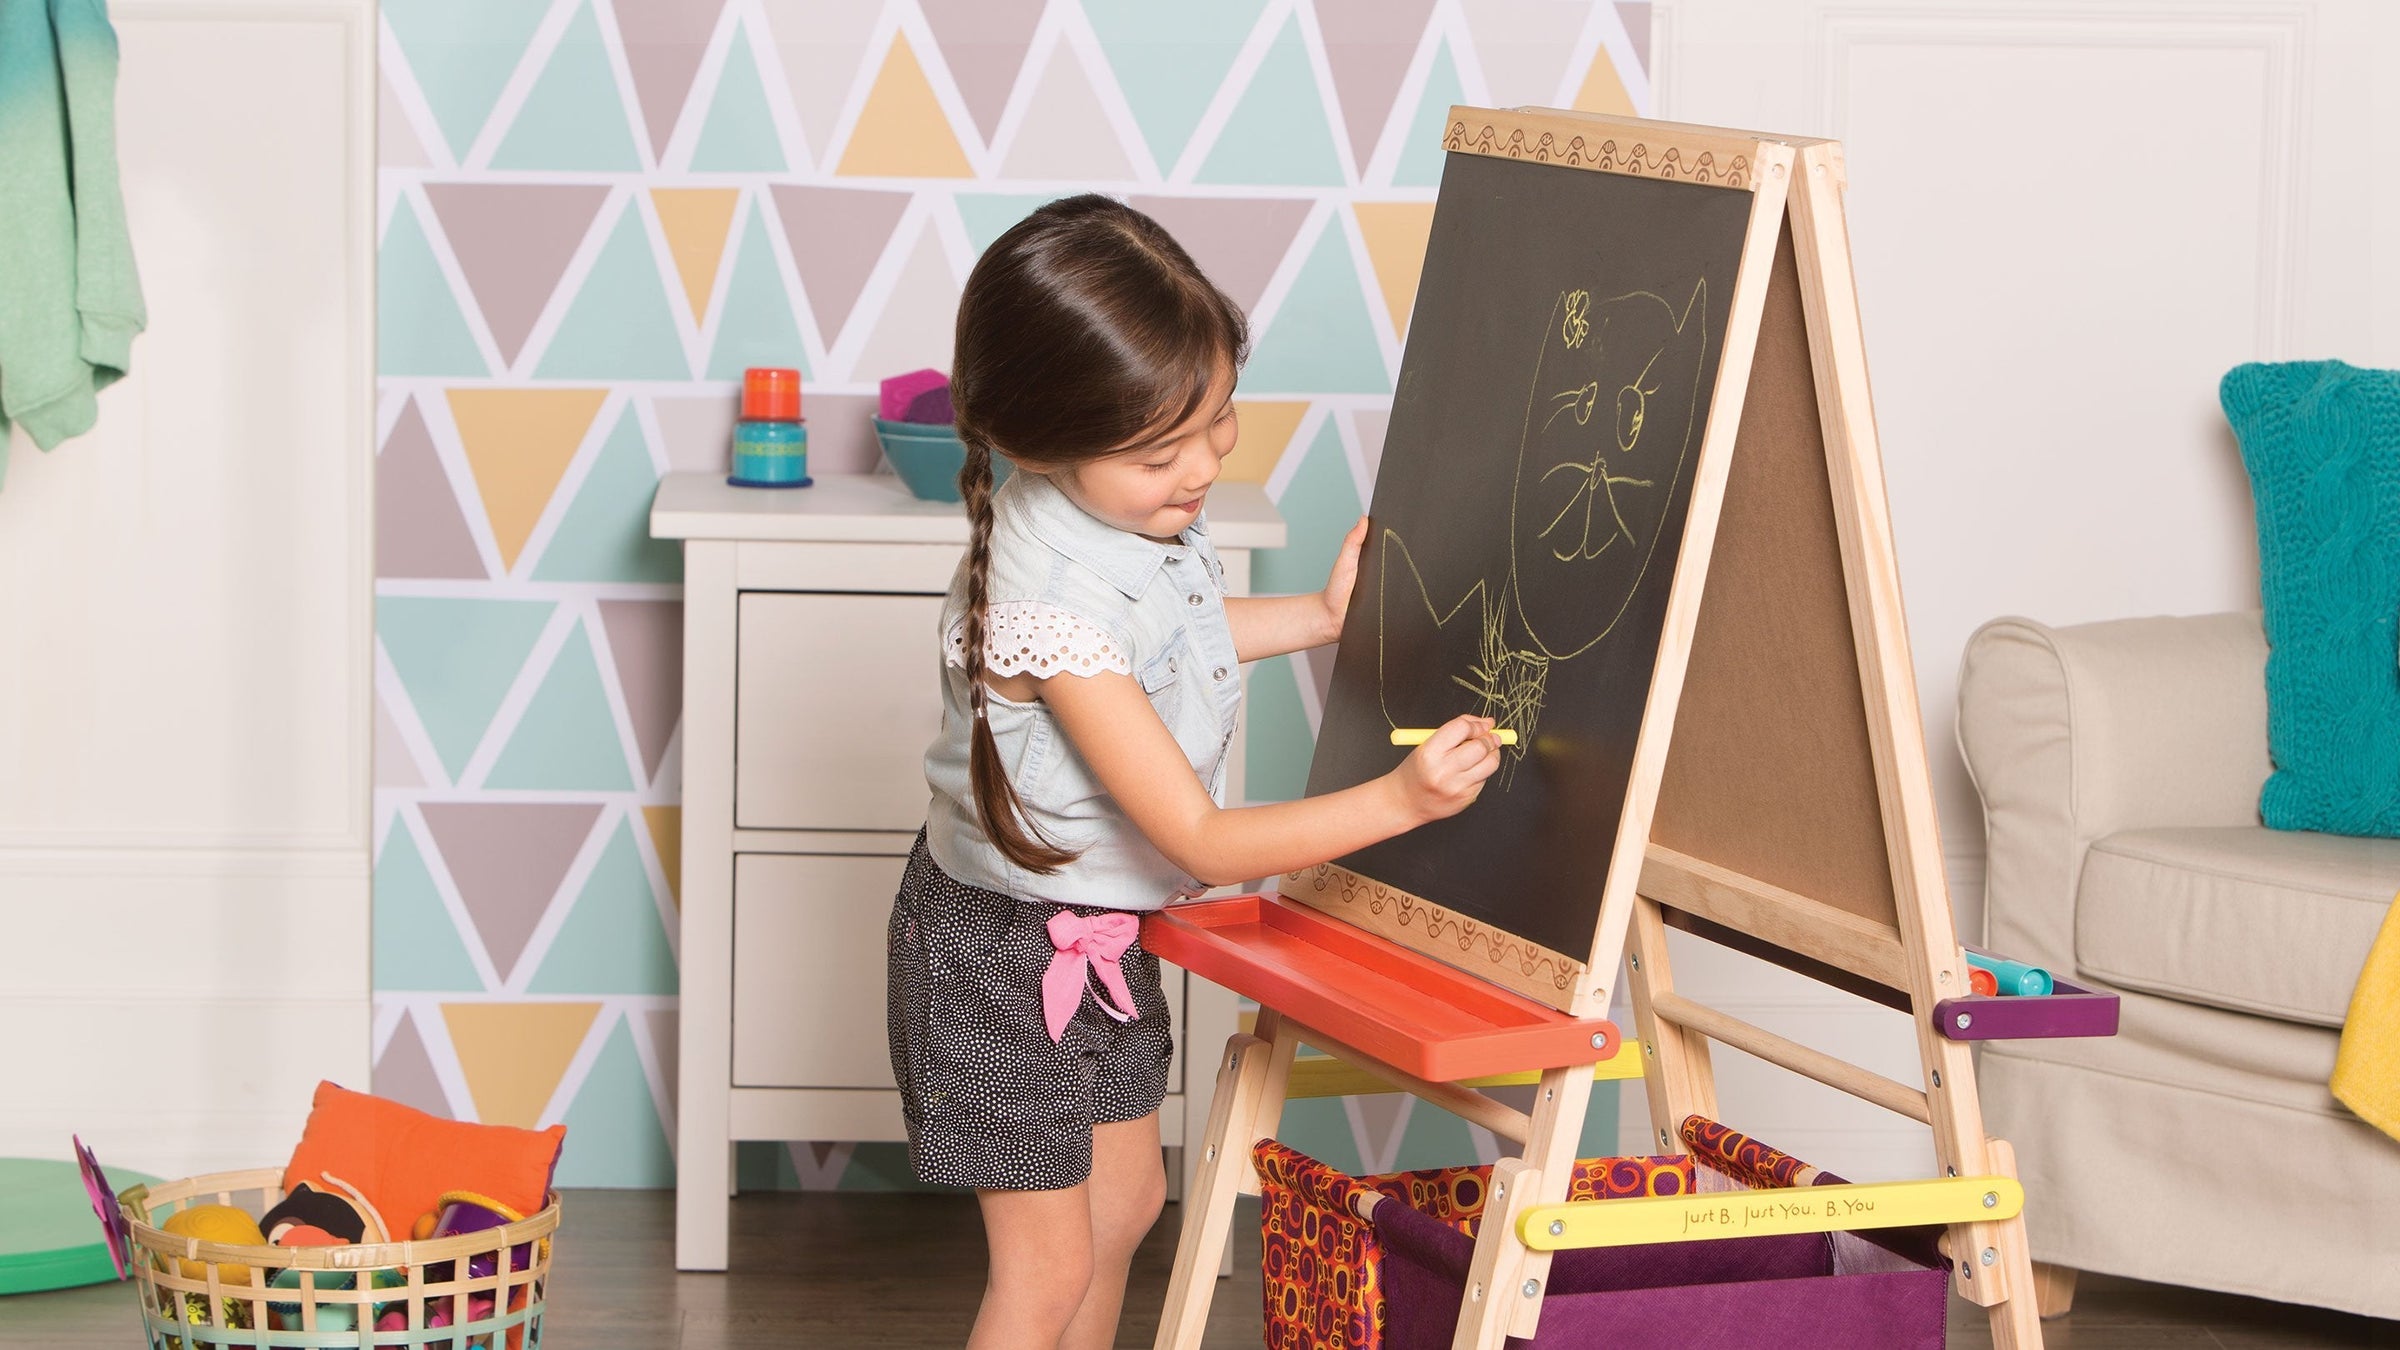 A little girl drawing on a Chalk board